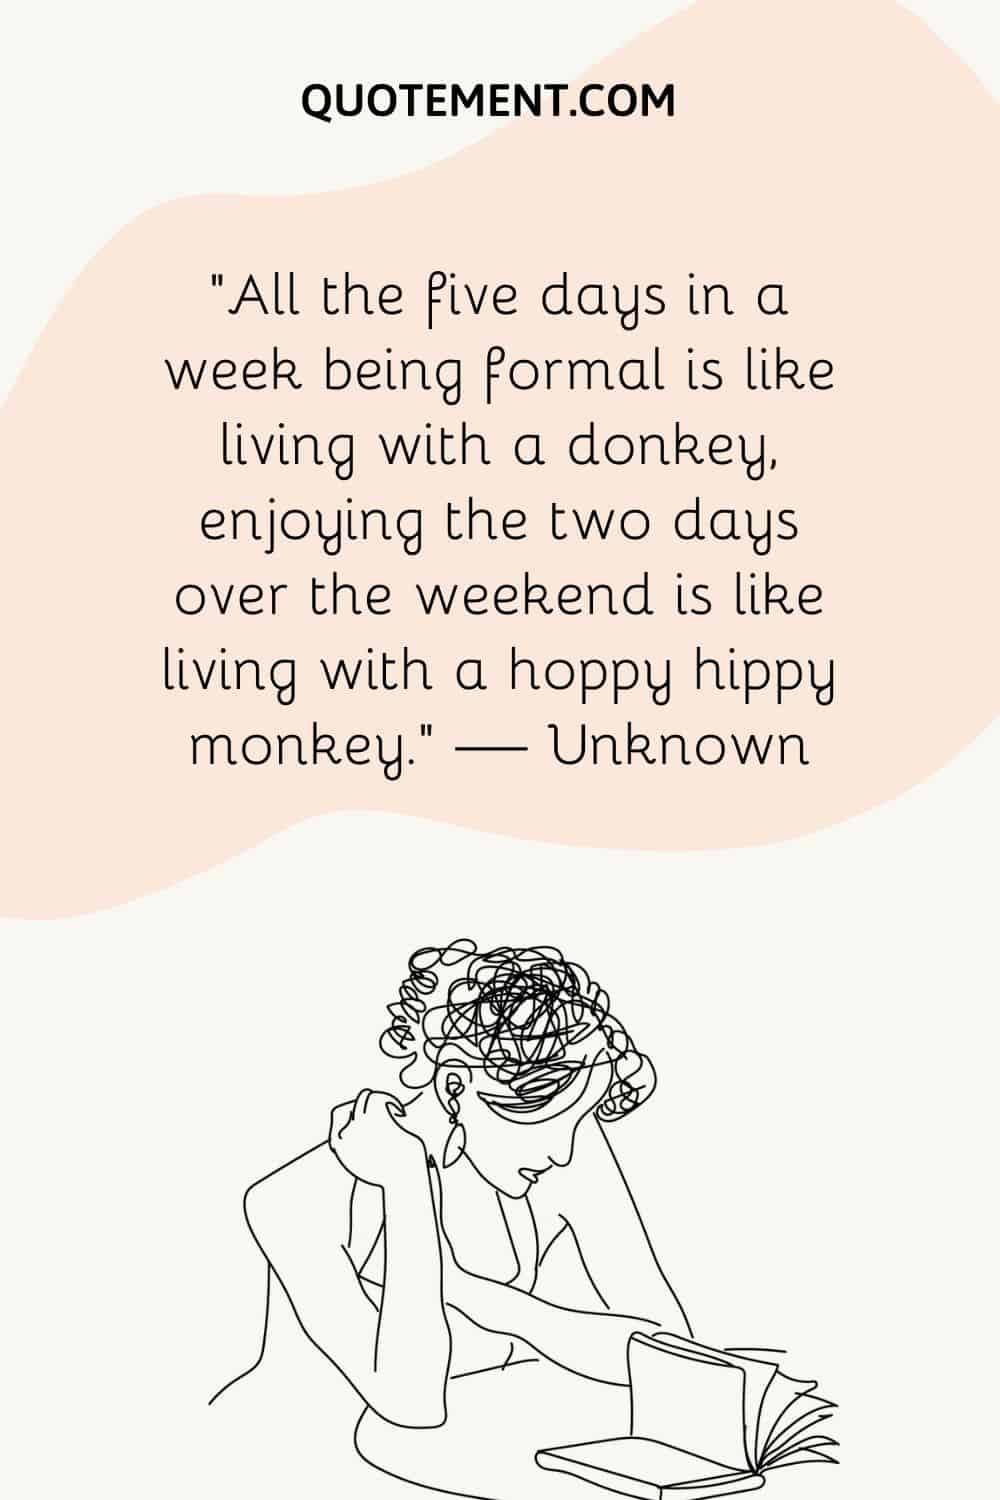 “All the five days in a week being formal is like living with a donkey, enjoying the two days over the weekend is like living with a hoppy hippy monkey.” — Unknown
